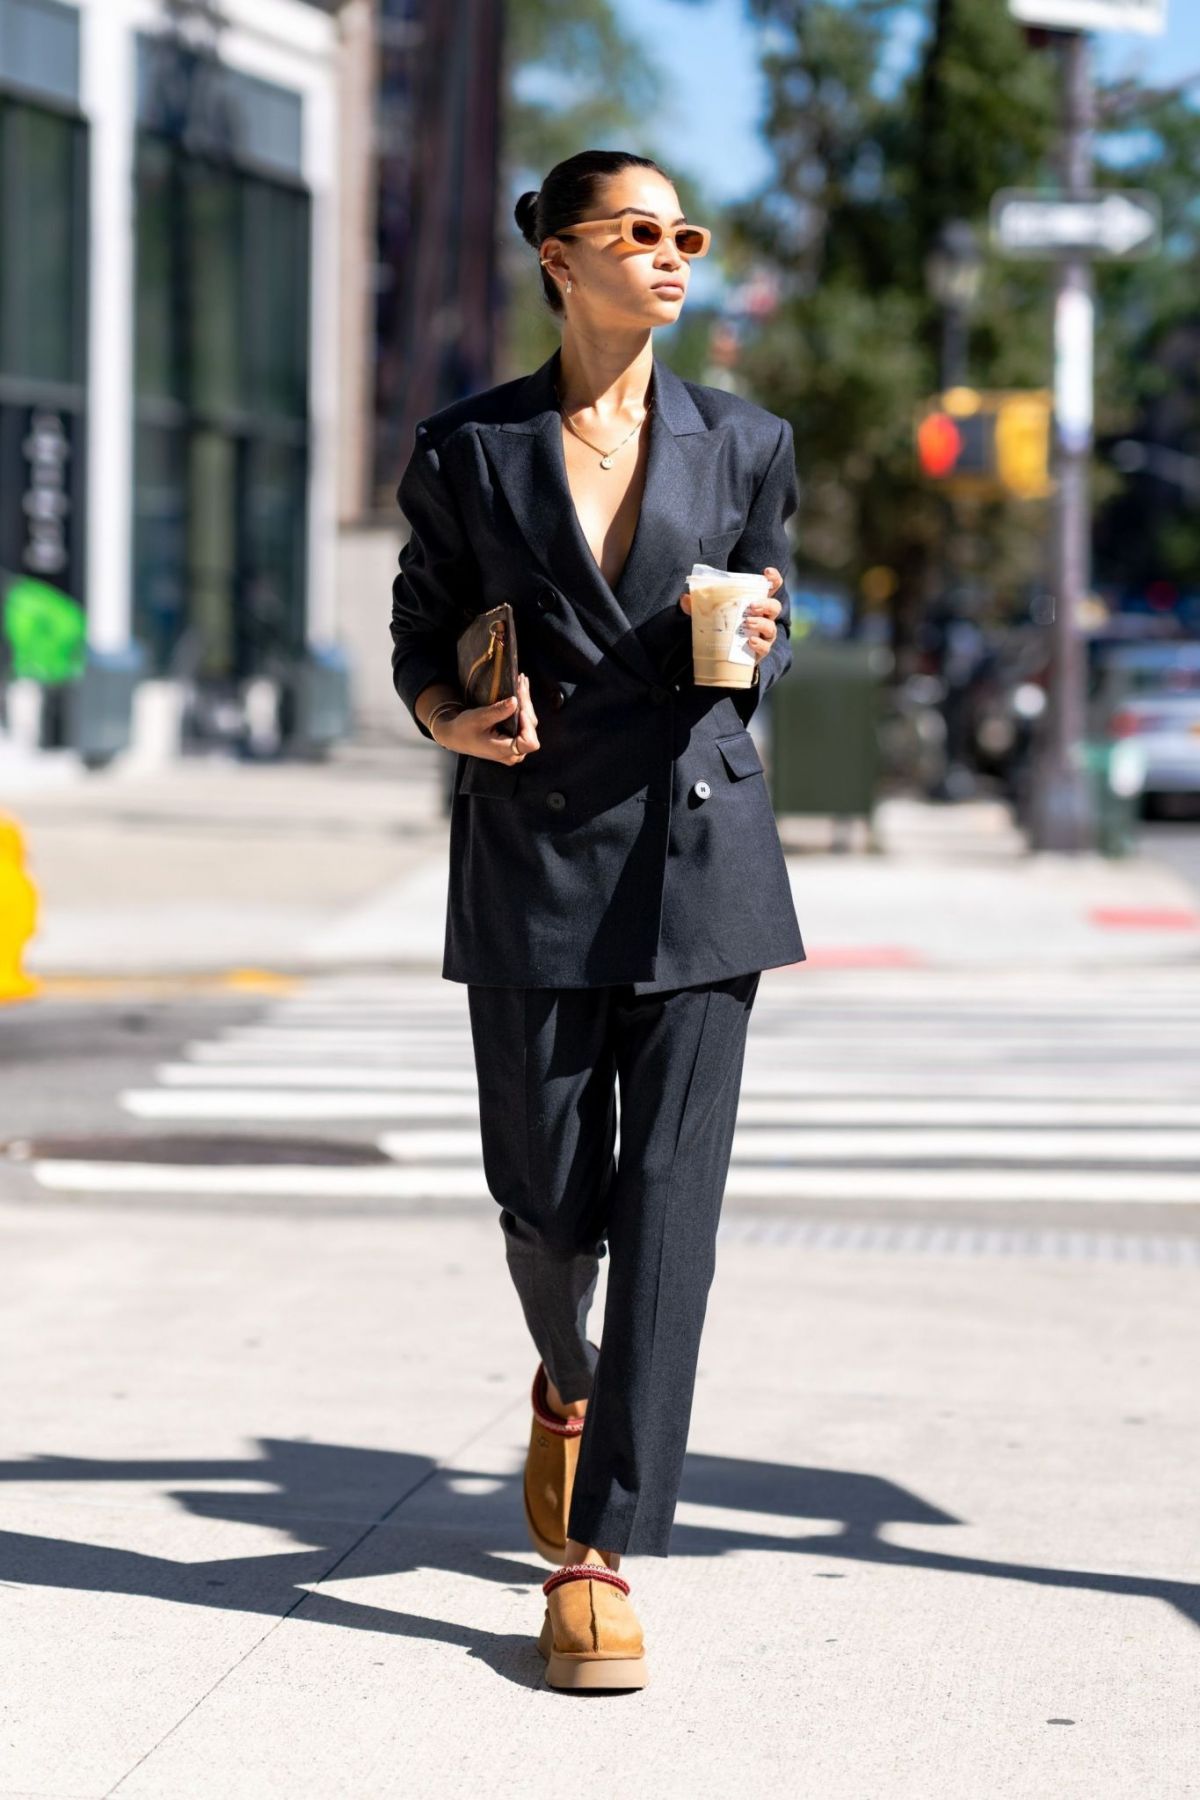 SHANINA SHAIK Out for Coffee in New York 09/11/2021 – HawtCelebs